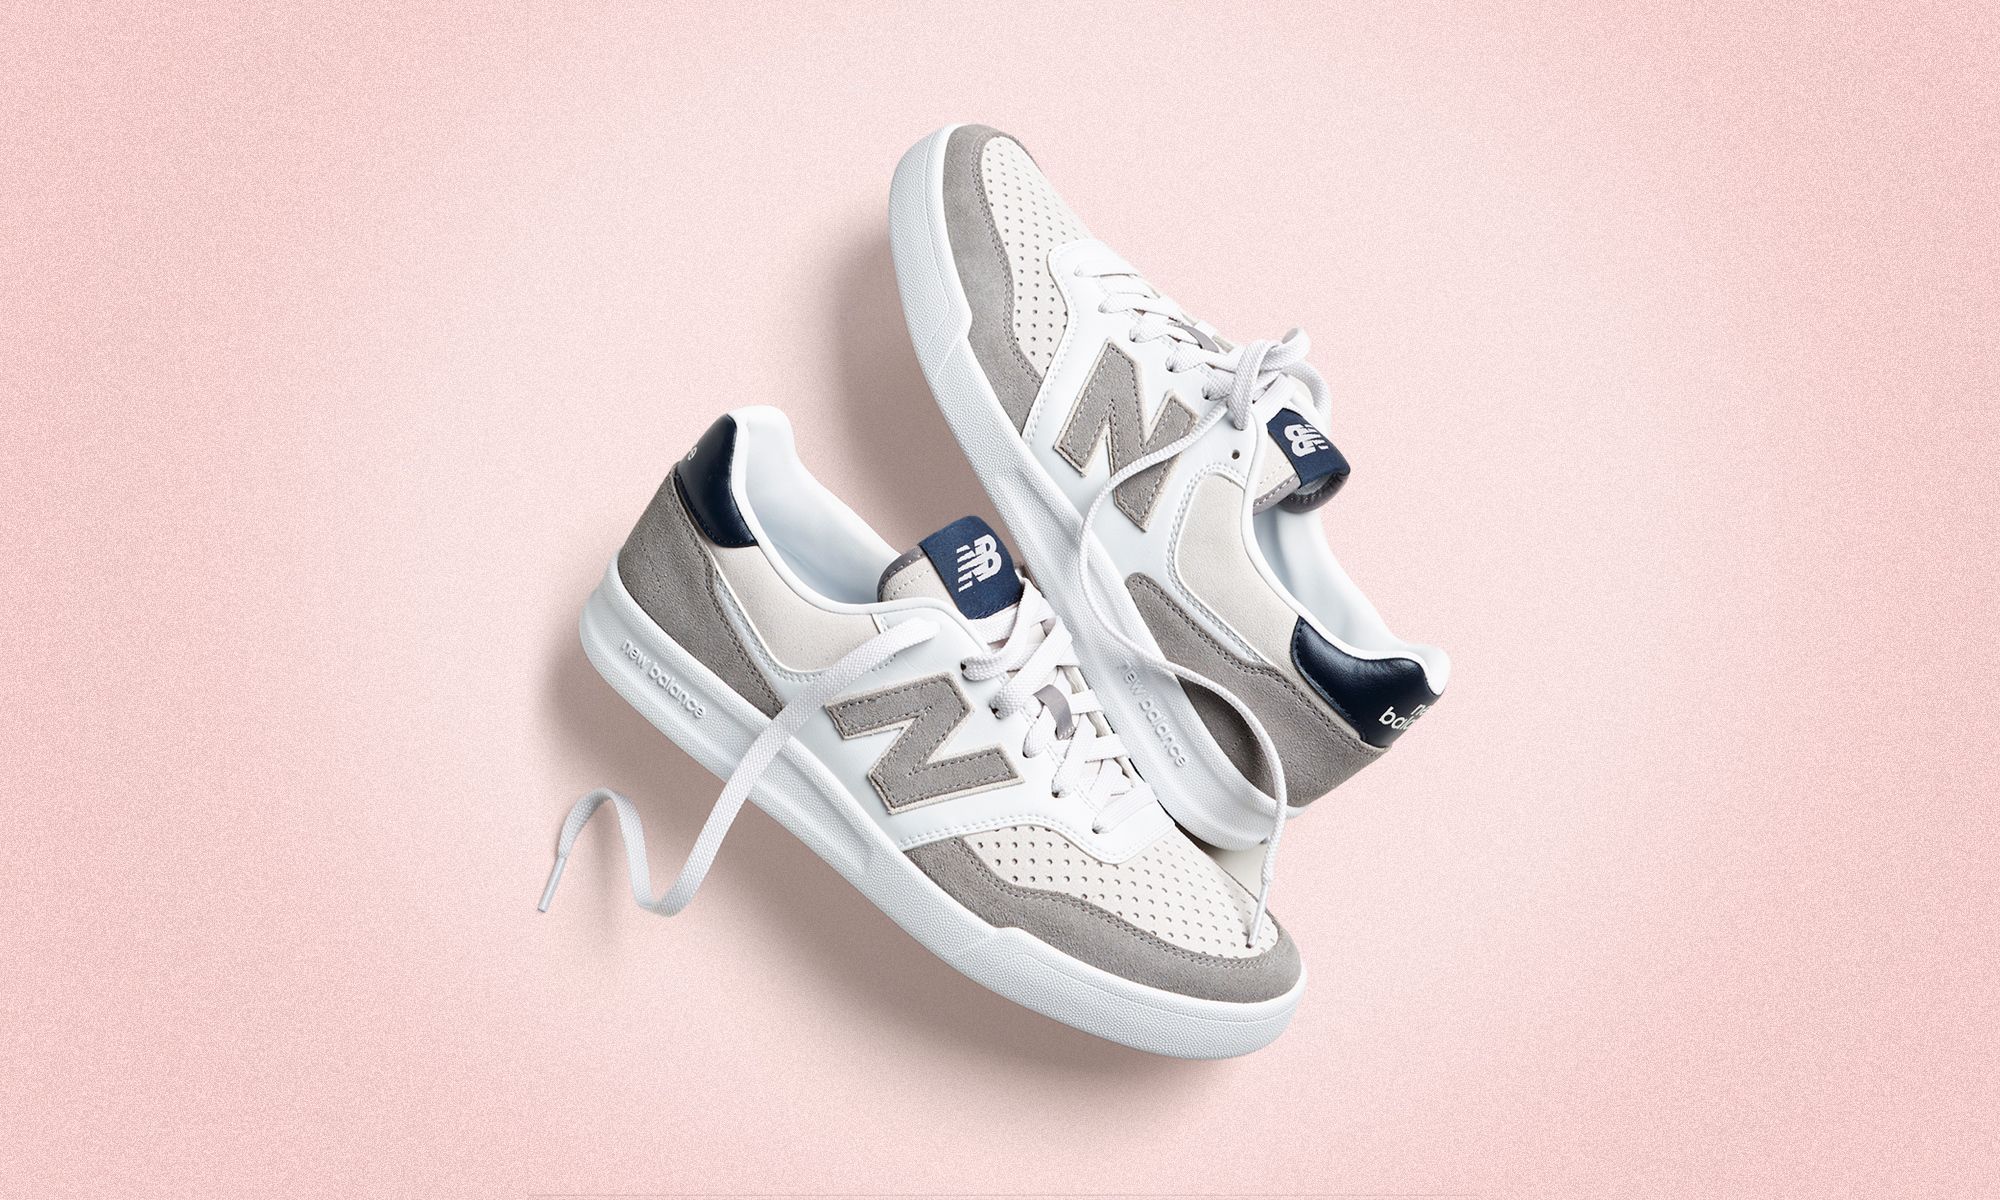 New Balance x J.Crew CRT300 V2 Sneakers Release, Price, and Where ...